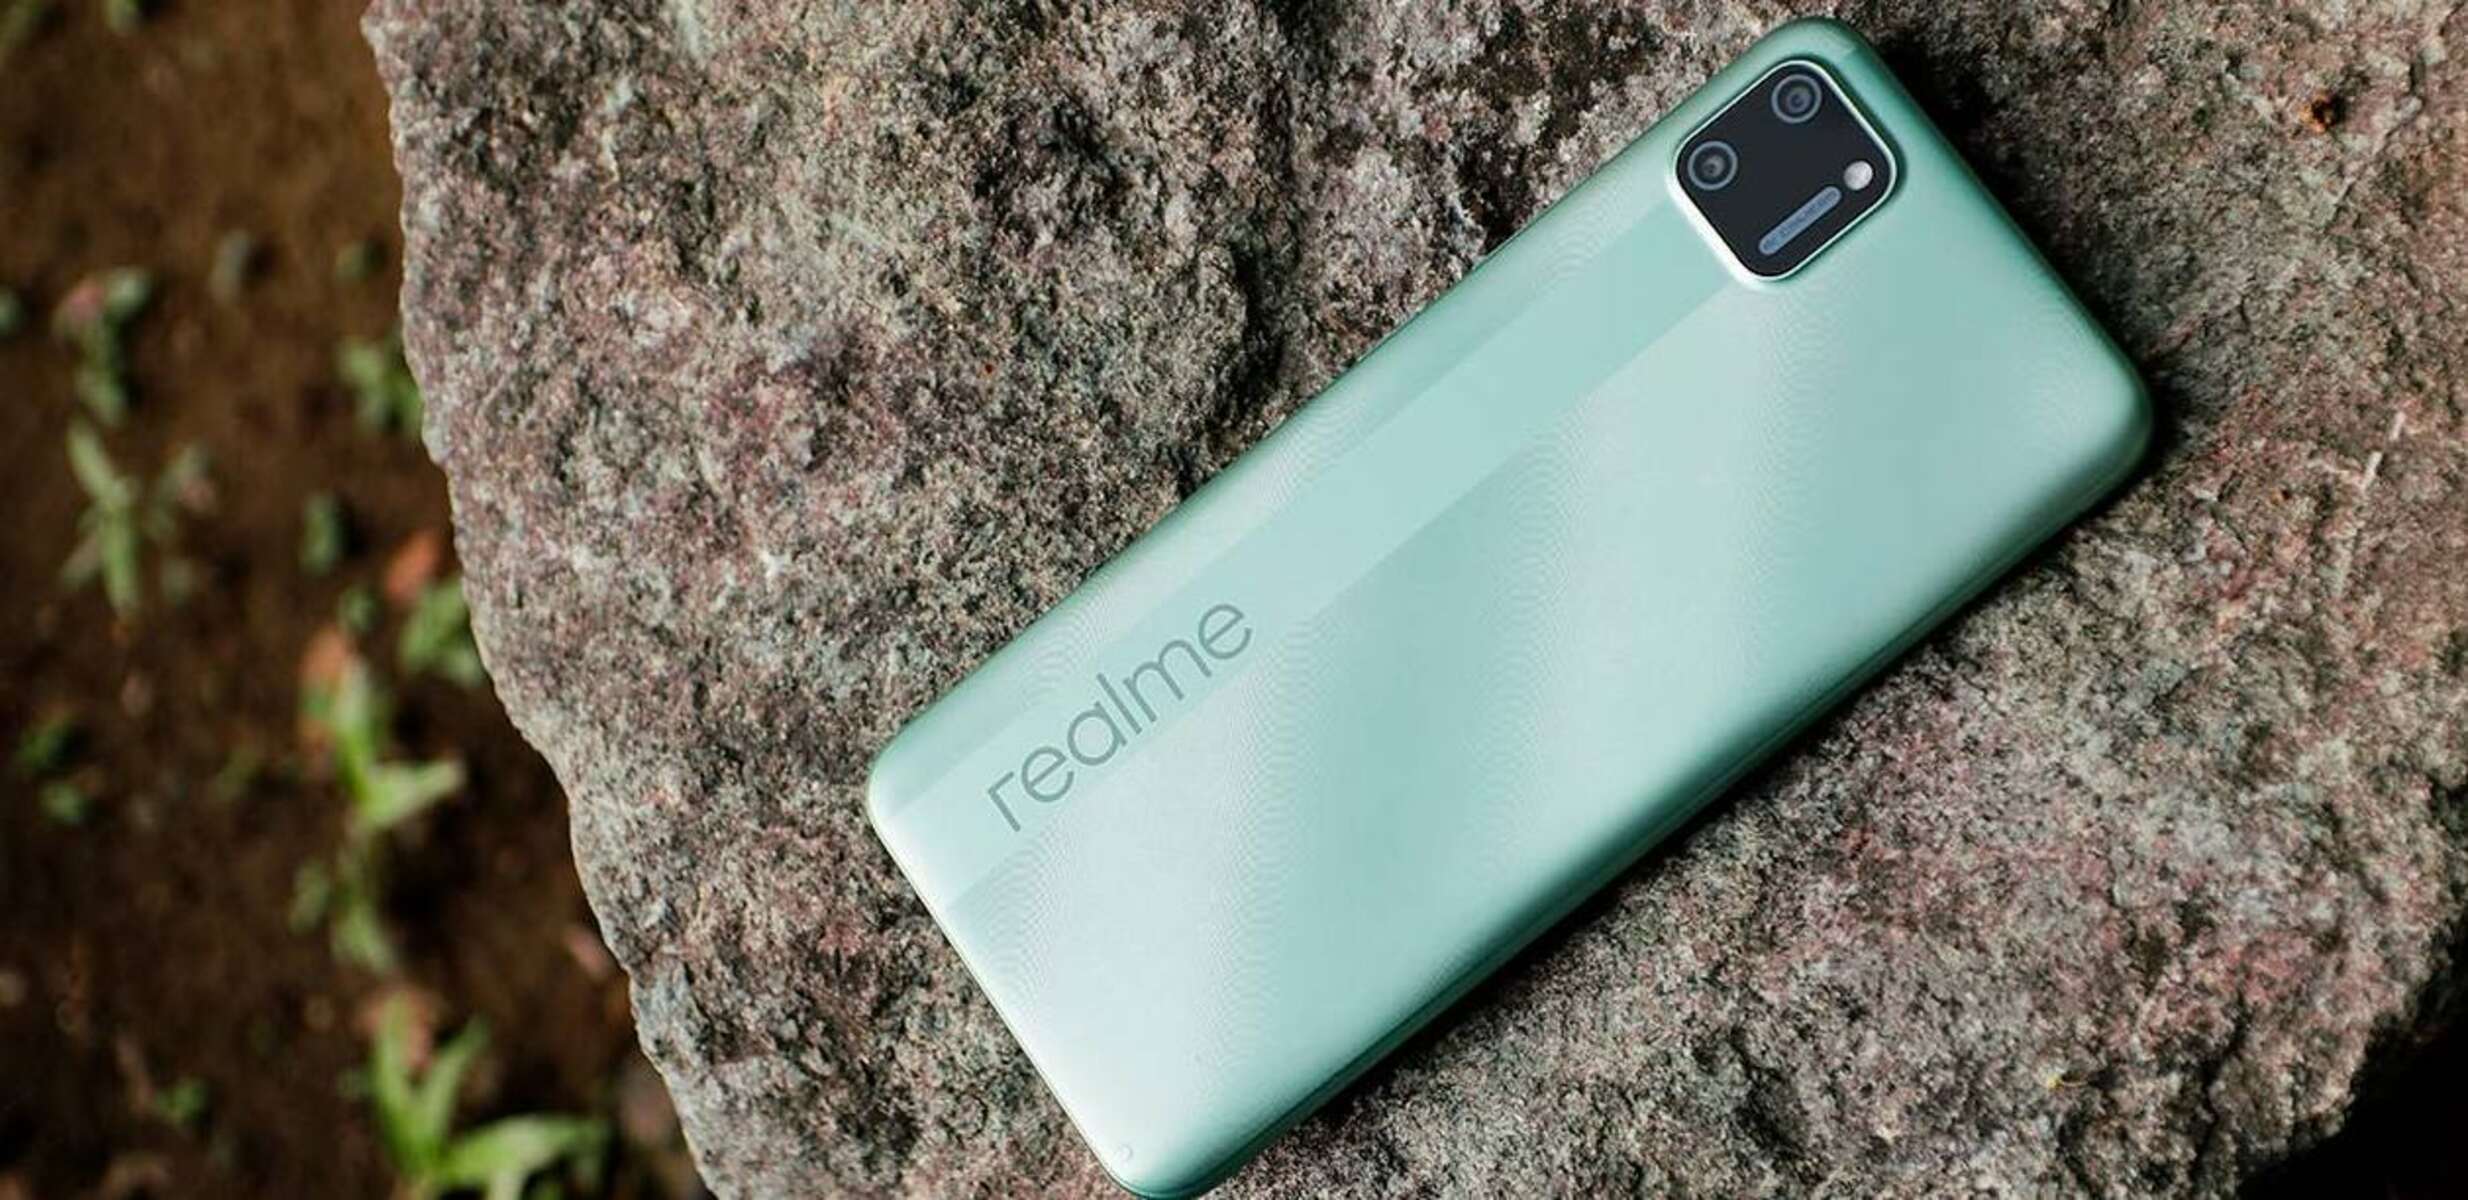 Complete Guide To Resetting Realme C11 To Factory Settings